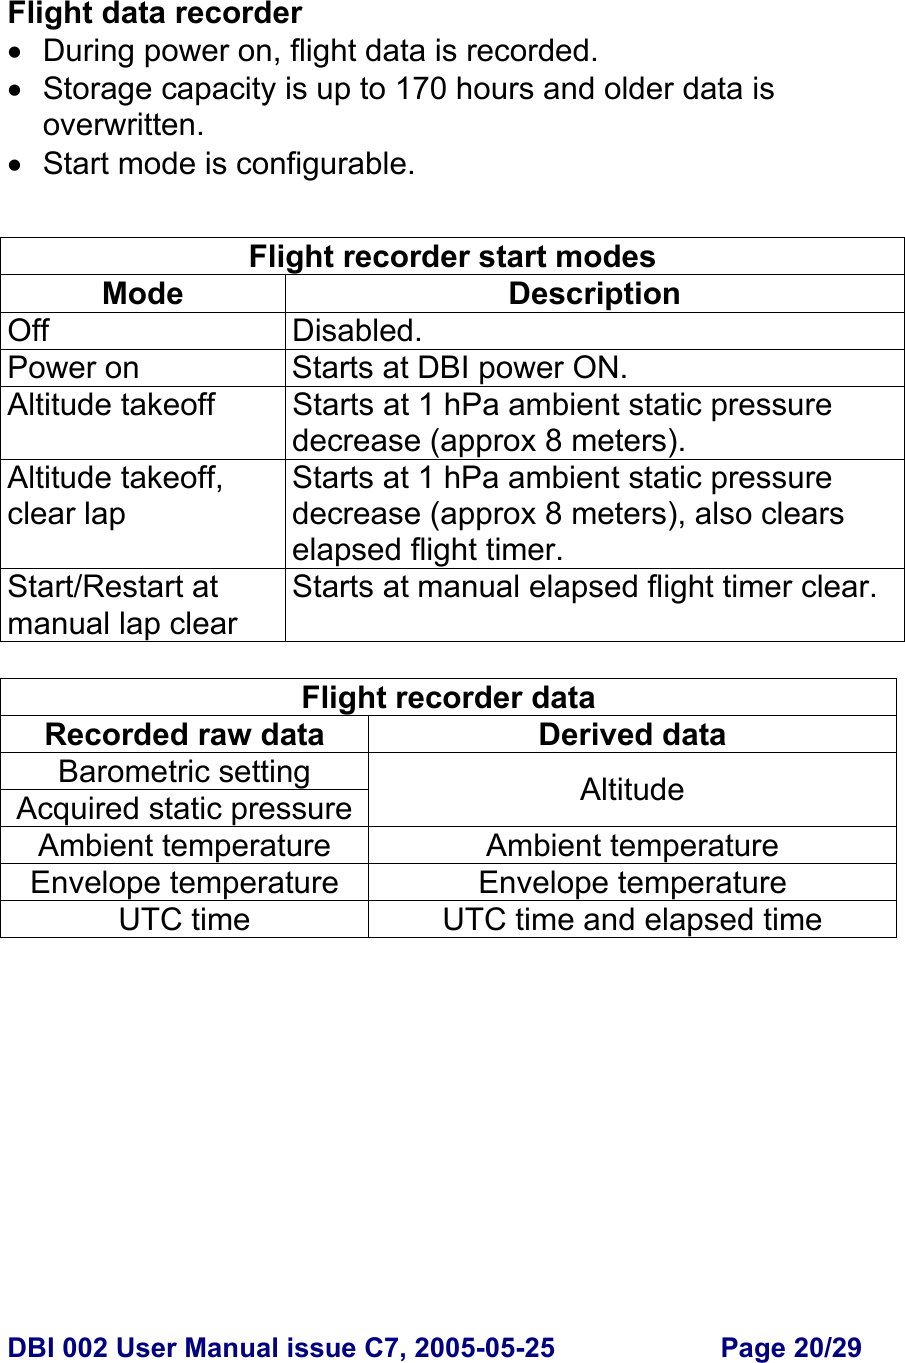  DBI 002 User Manual issue C7, 2005-05-25  Page 20/29   Flight data recorder •  During power on, flight data is recorded. •  Storage capacity is up to 170 hours and older data is overwritten. • Start mode is configurable.   Flight recorder start modes Mode Description Off Disabled. Power on  Starts at DBI power ON. Altitude takeoff  Starts at 1 hPa ambient static pressure decrease (approx 8 meters). Altitude takeoff, clear lap Starts at 1 hPa ambient static pressure decrease (approx 8 meters), also clears elapsed flight timer. Start/Restart at manual lap clear Starts at manual elapsed flight timer clear.  Flight recorder data Recorded raw data  Derived data Barometric setting Acquired static pressure Altitude Ambient temperature  Ambient temperature Envelope temperature  Envelope temperature UTC time  UTC time and elapsed time   